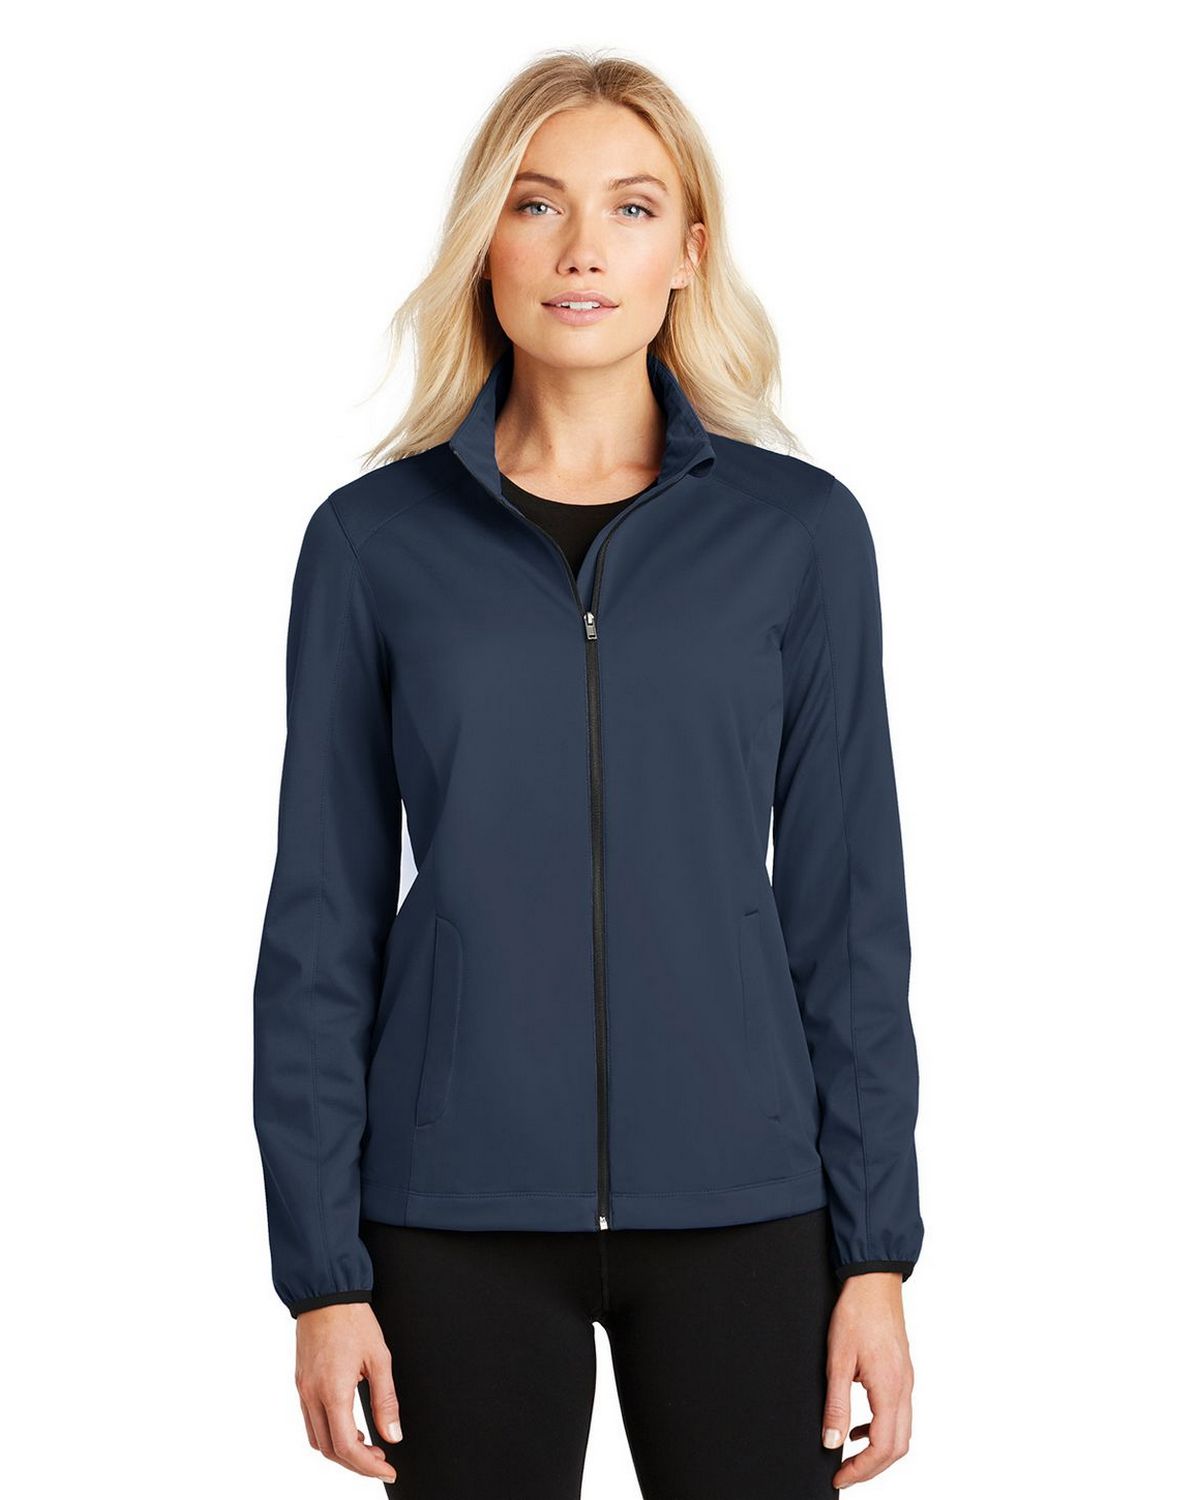 Buy Active Jackets for Men and Women | ApparelnBags.com